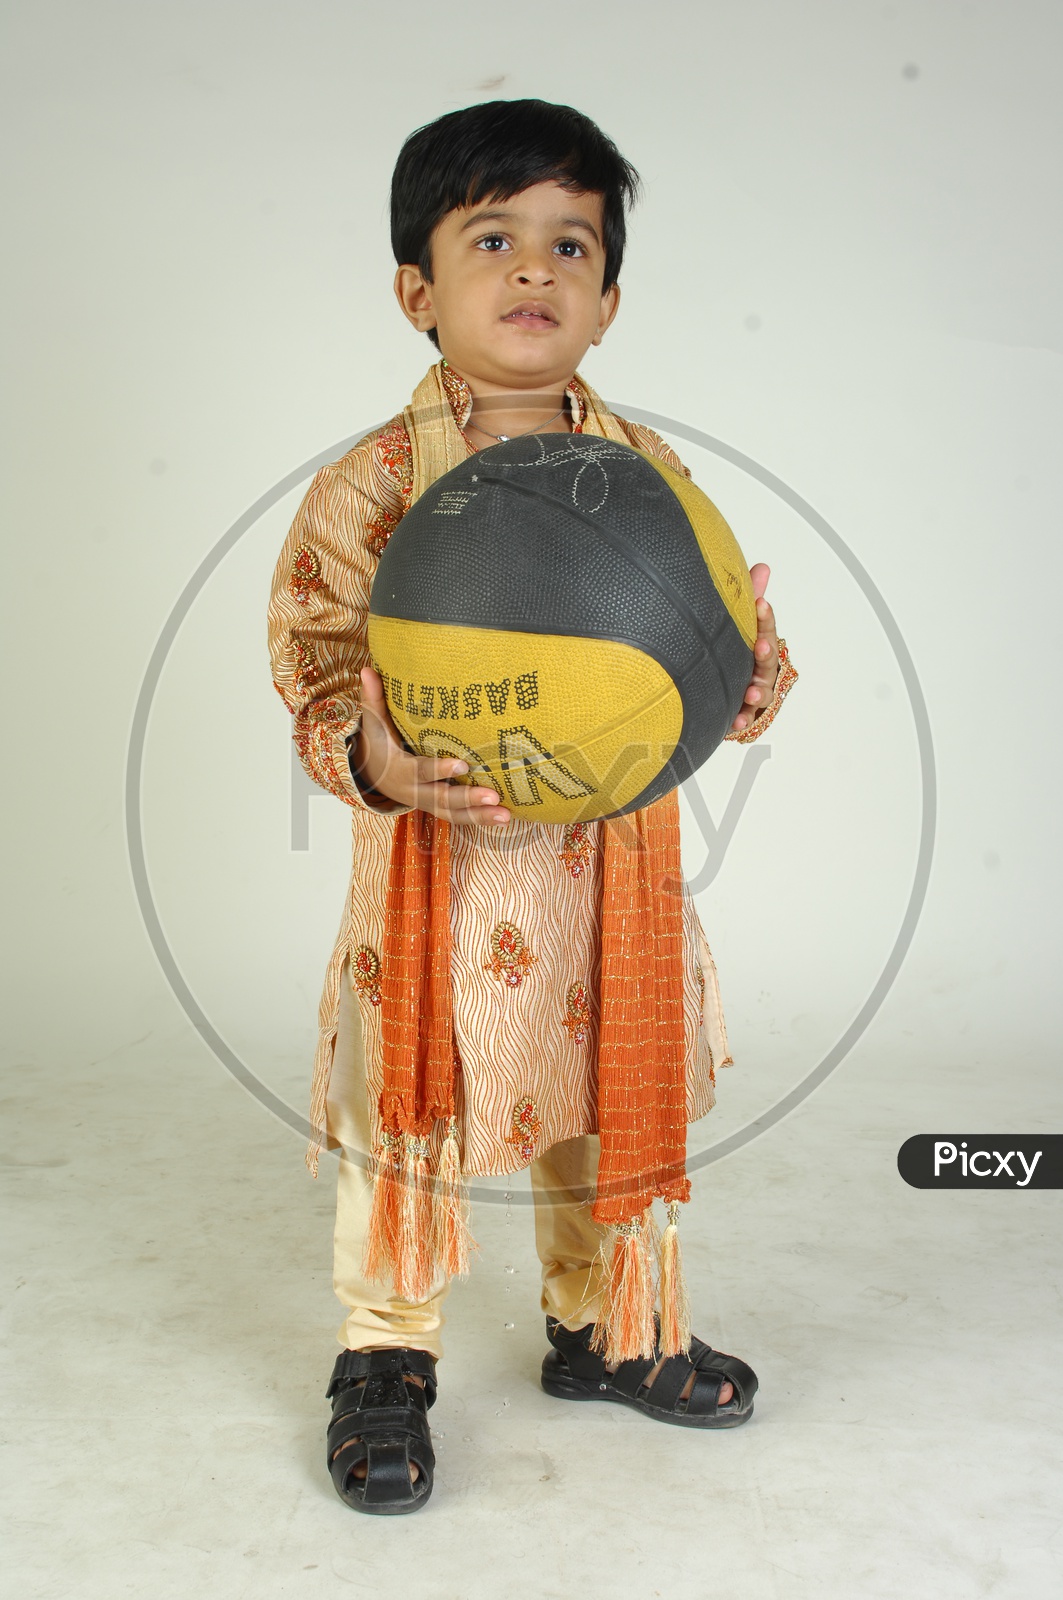 Indian Boy in Traditional Clothes With a Smiling Face  and With a Basketball in Hand  Over an Isolated White Background